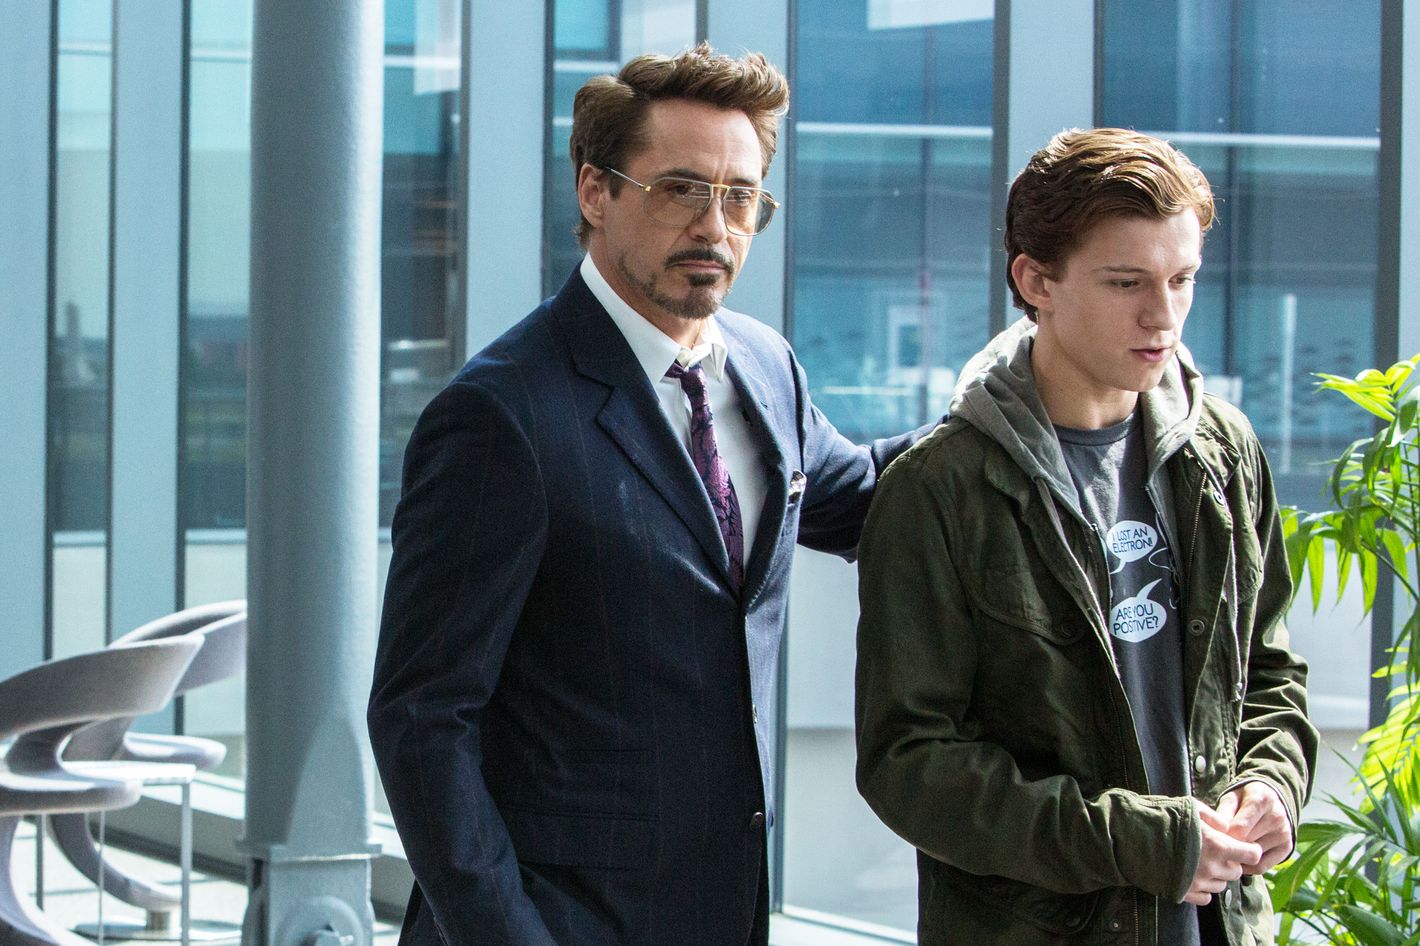 A Serious Critique Of The MCU's Off-Duty Fashion